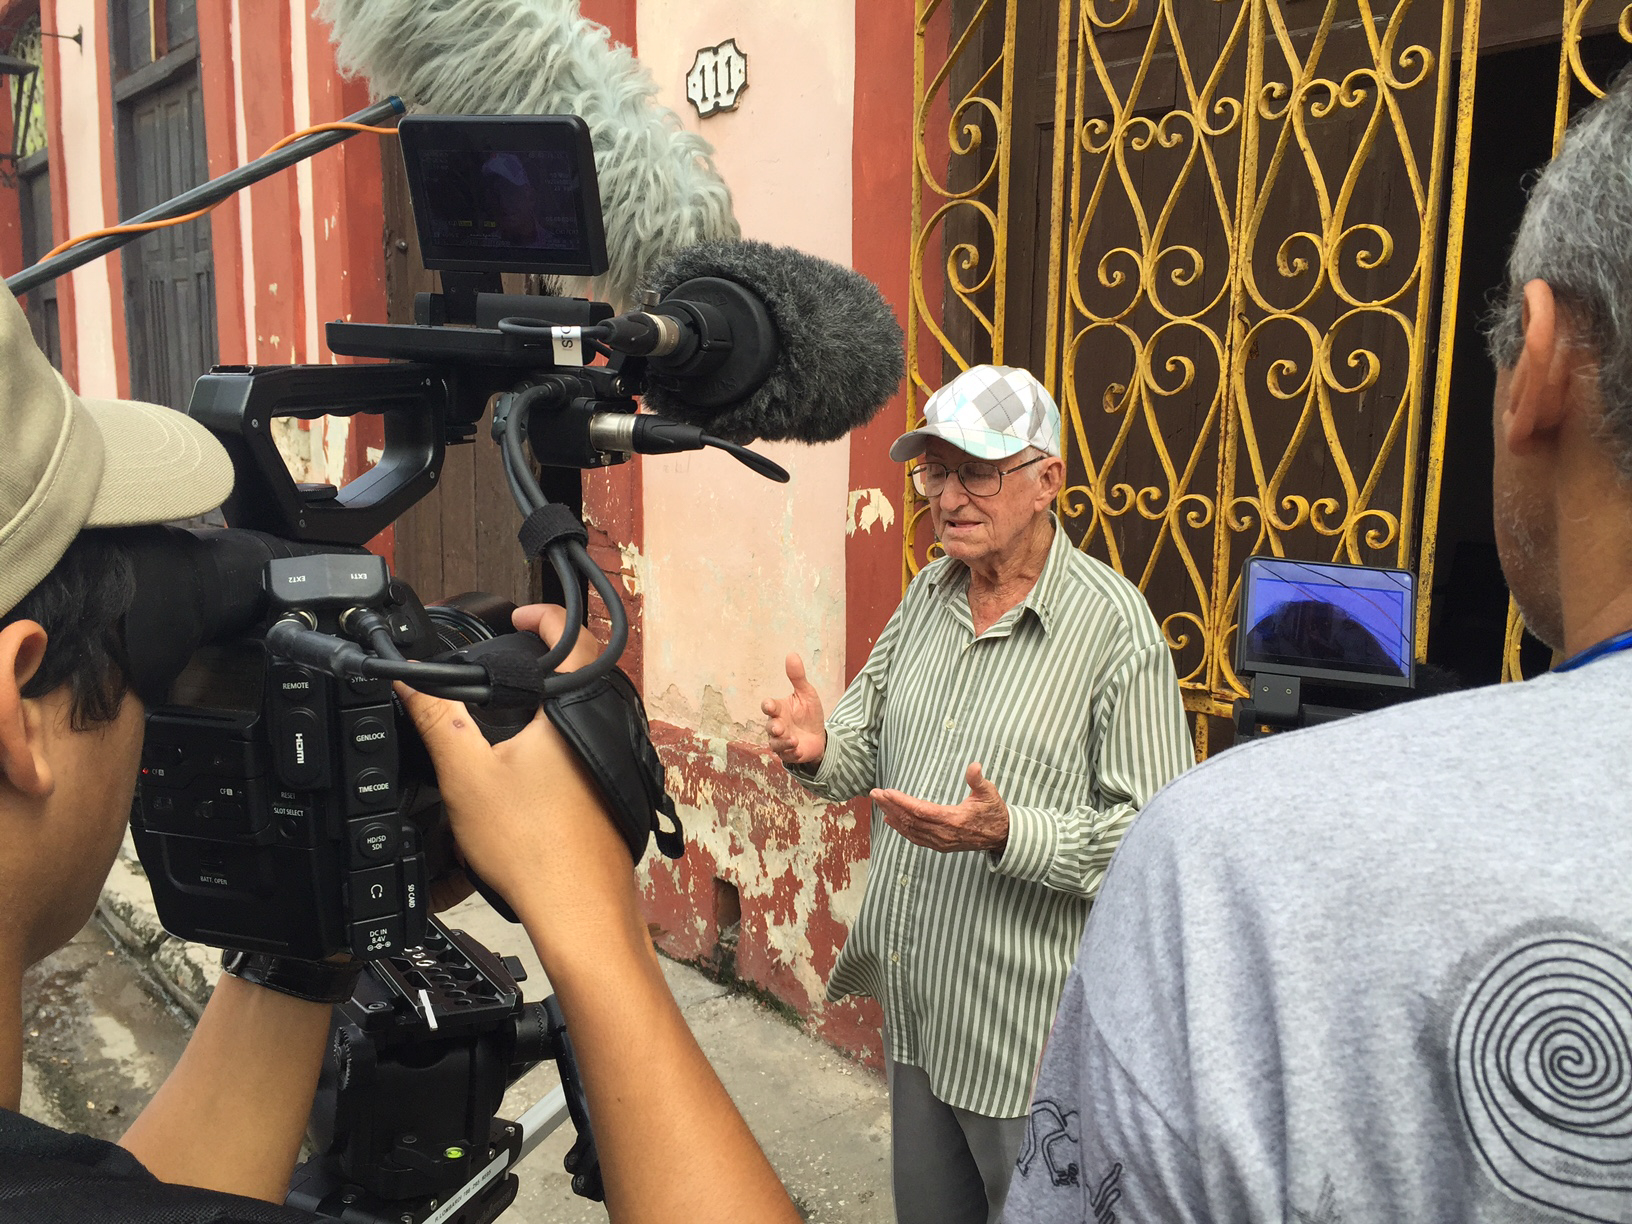  CUBA- The production team filmed an interview with a cuban citizen, Dagoberto Yanez Reyes. He talks about how he hopes that the new relations between Cuba and the United States will bring people together.

El equipo de producción filmó una entrevist